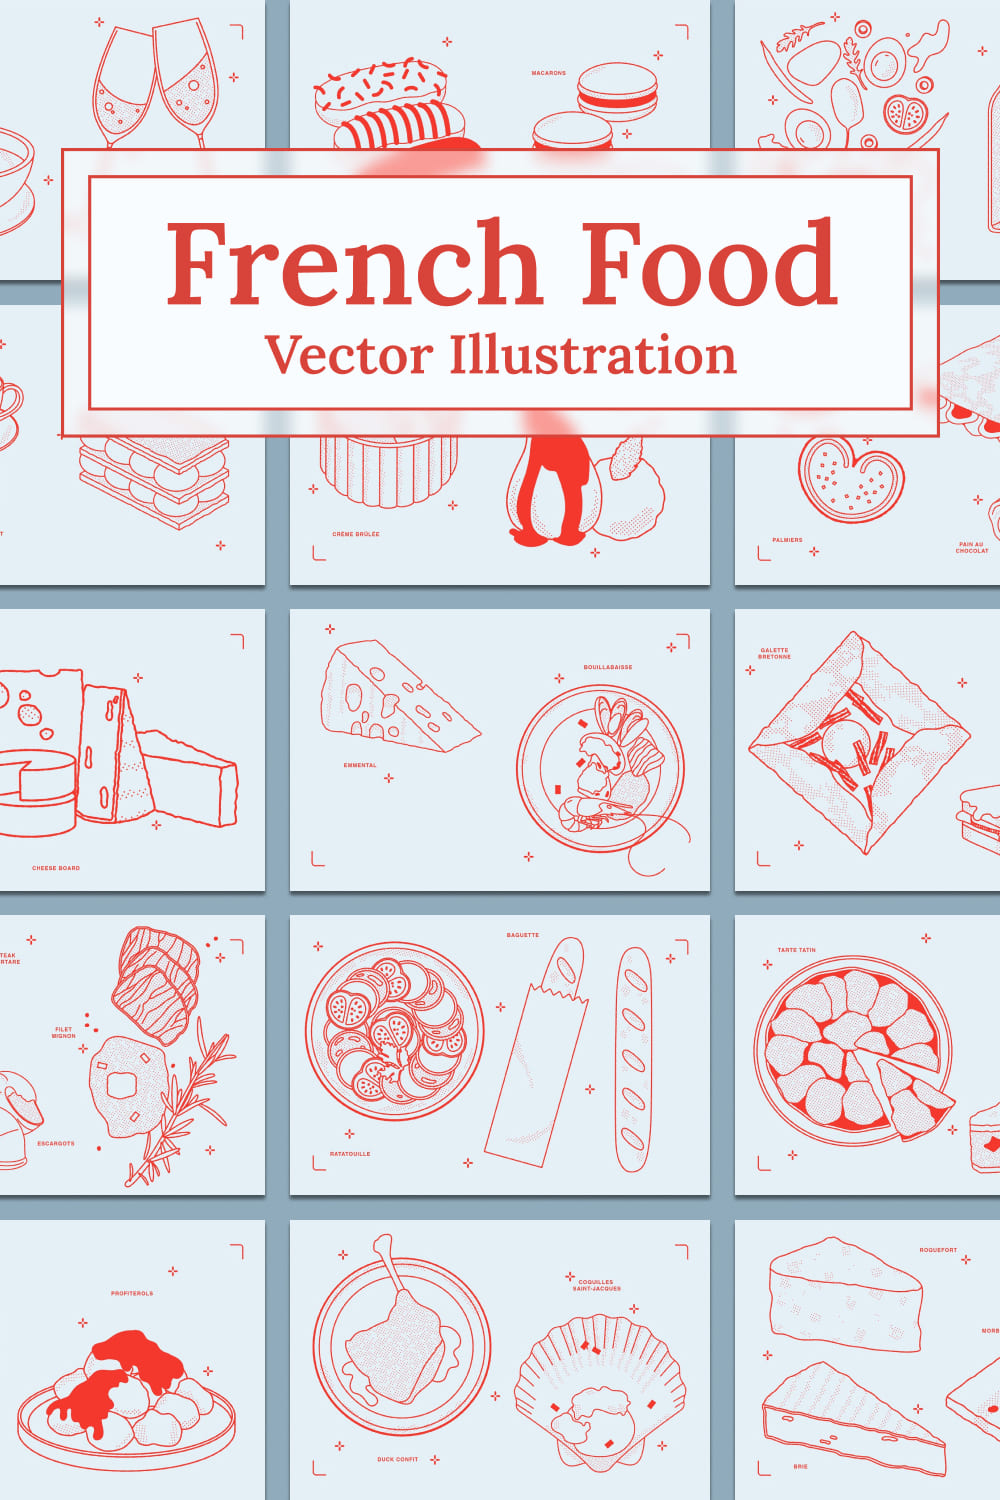 French food vector illustration - pinterest image preview.